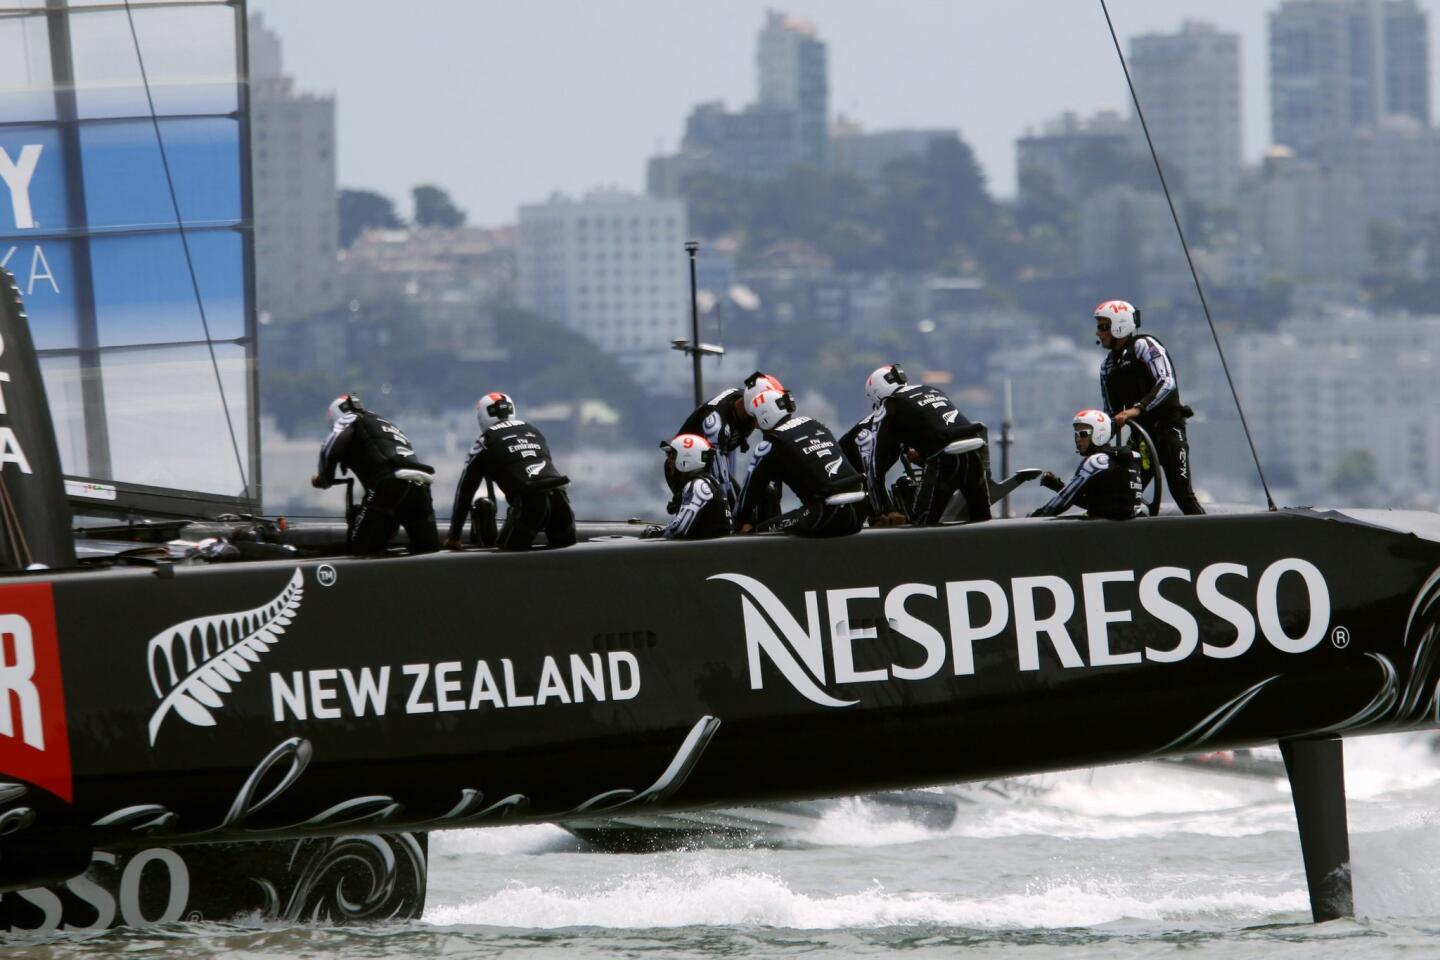 Emirates Team New Zealand sails near the city skyline during the round robin one yacht races of the Luis Vuitton Cup challenger series in the 34th America's Cup in San Francisco